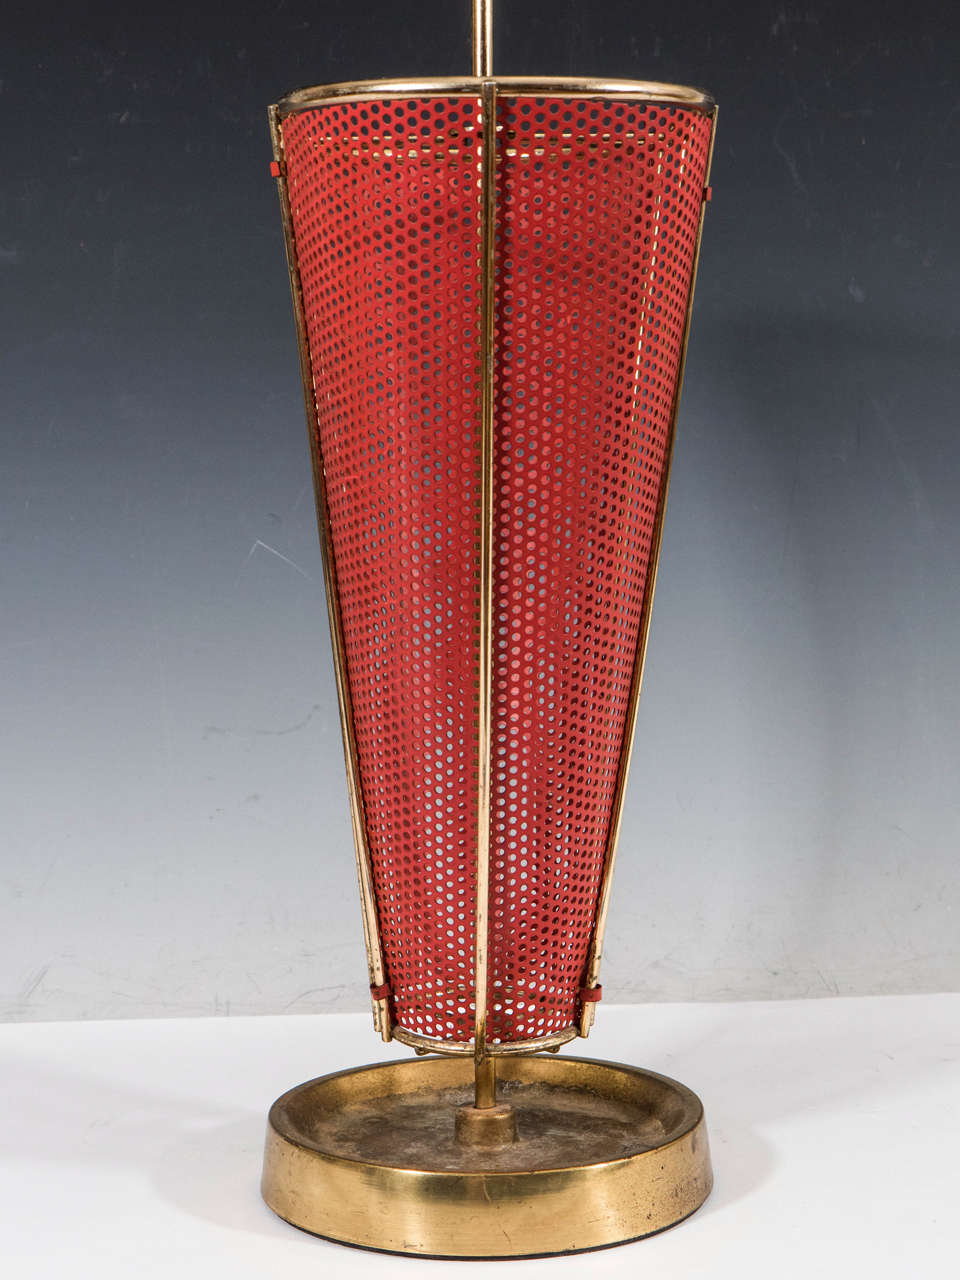 Midcentury Brass-Plated and Red Enameled Italian Umbrella Stand For Sale 3